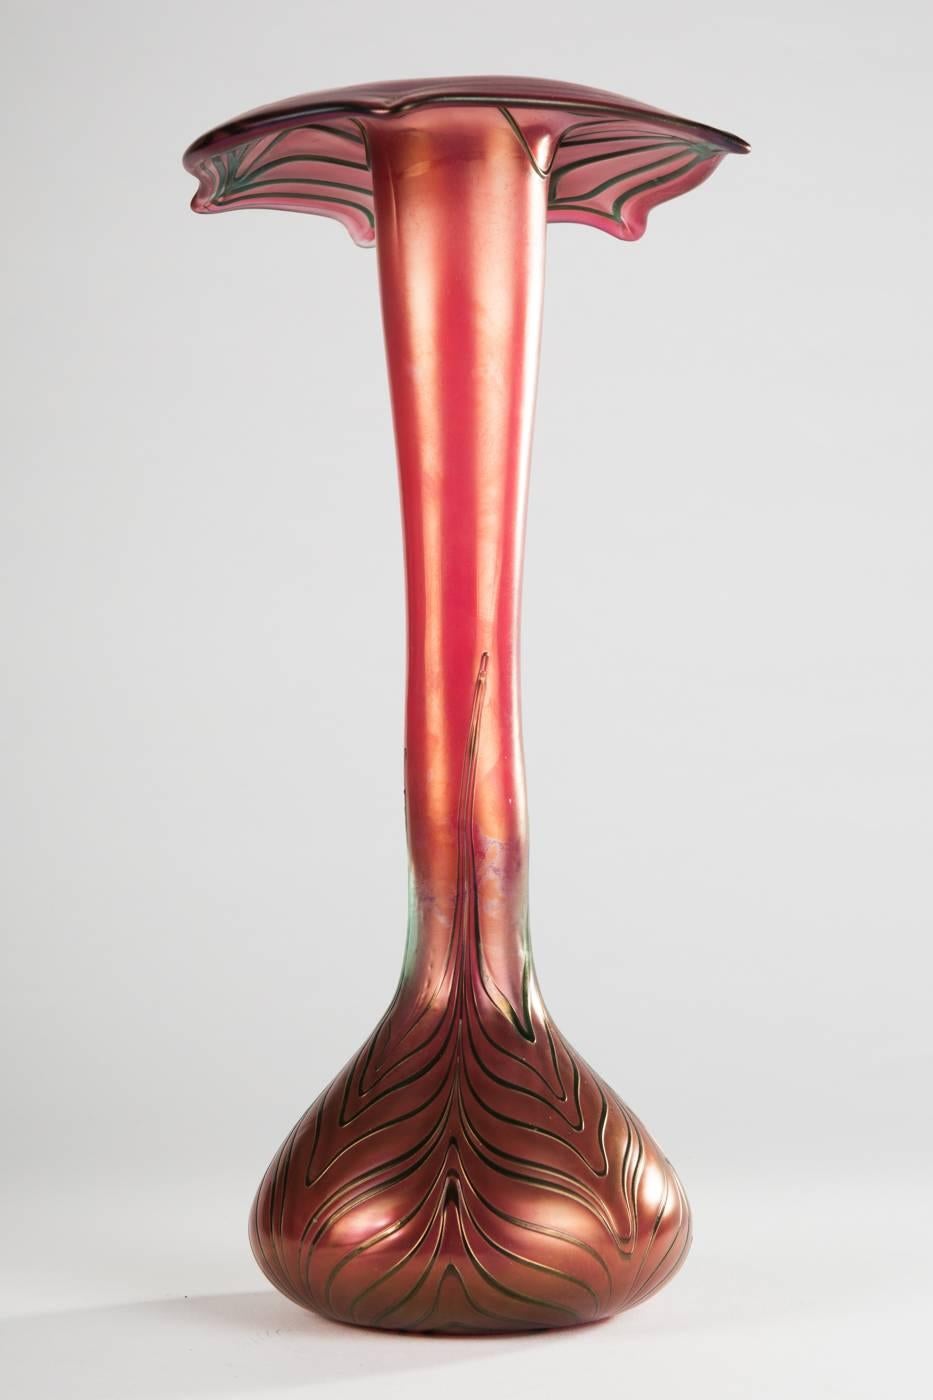 Bohemian glass vase, red tinted glass with spiral melting, 
H. approx. 28 cm, minimally rubbed.